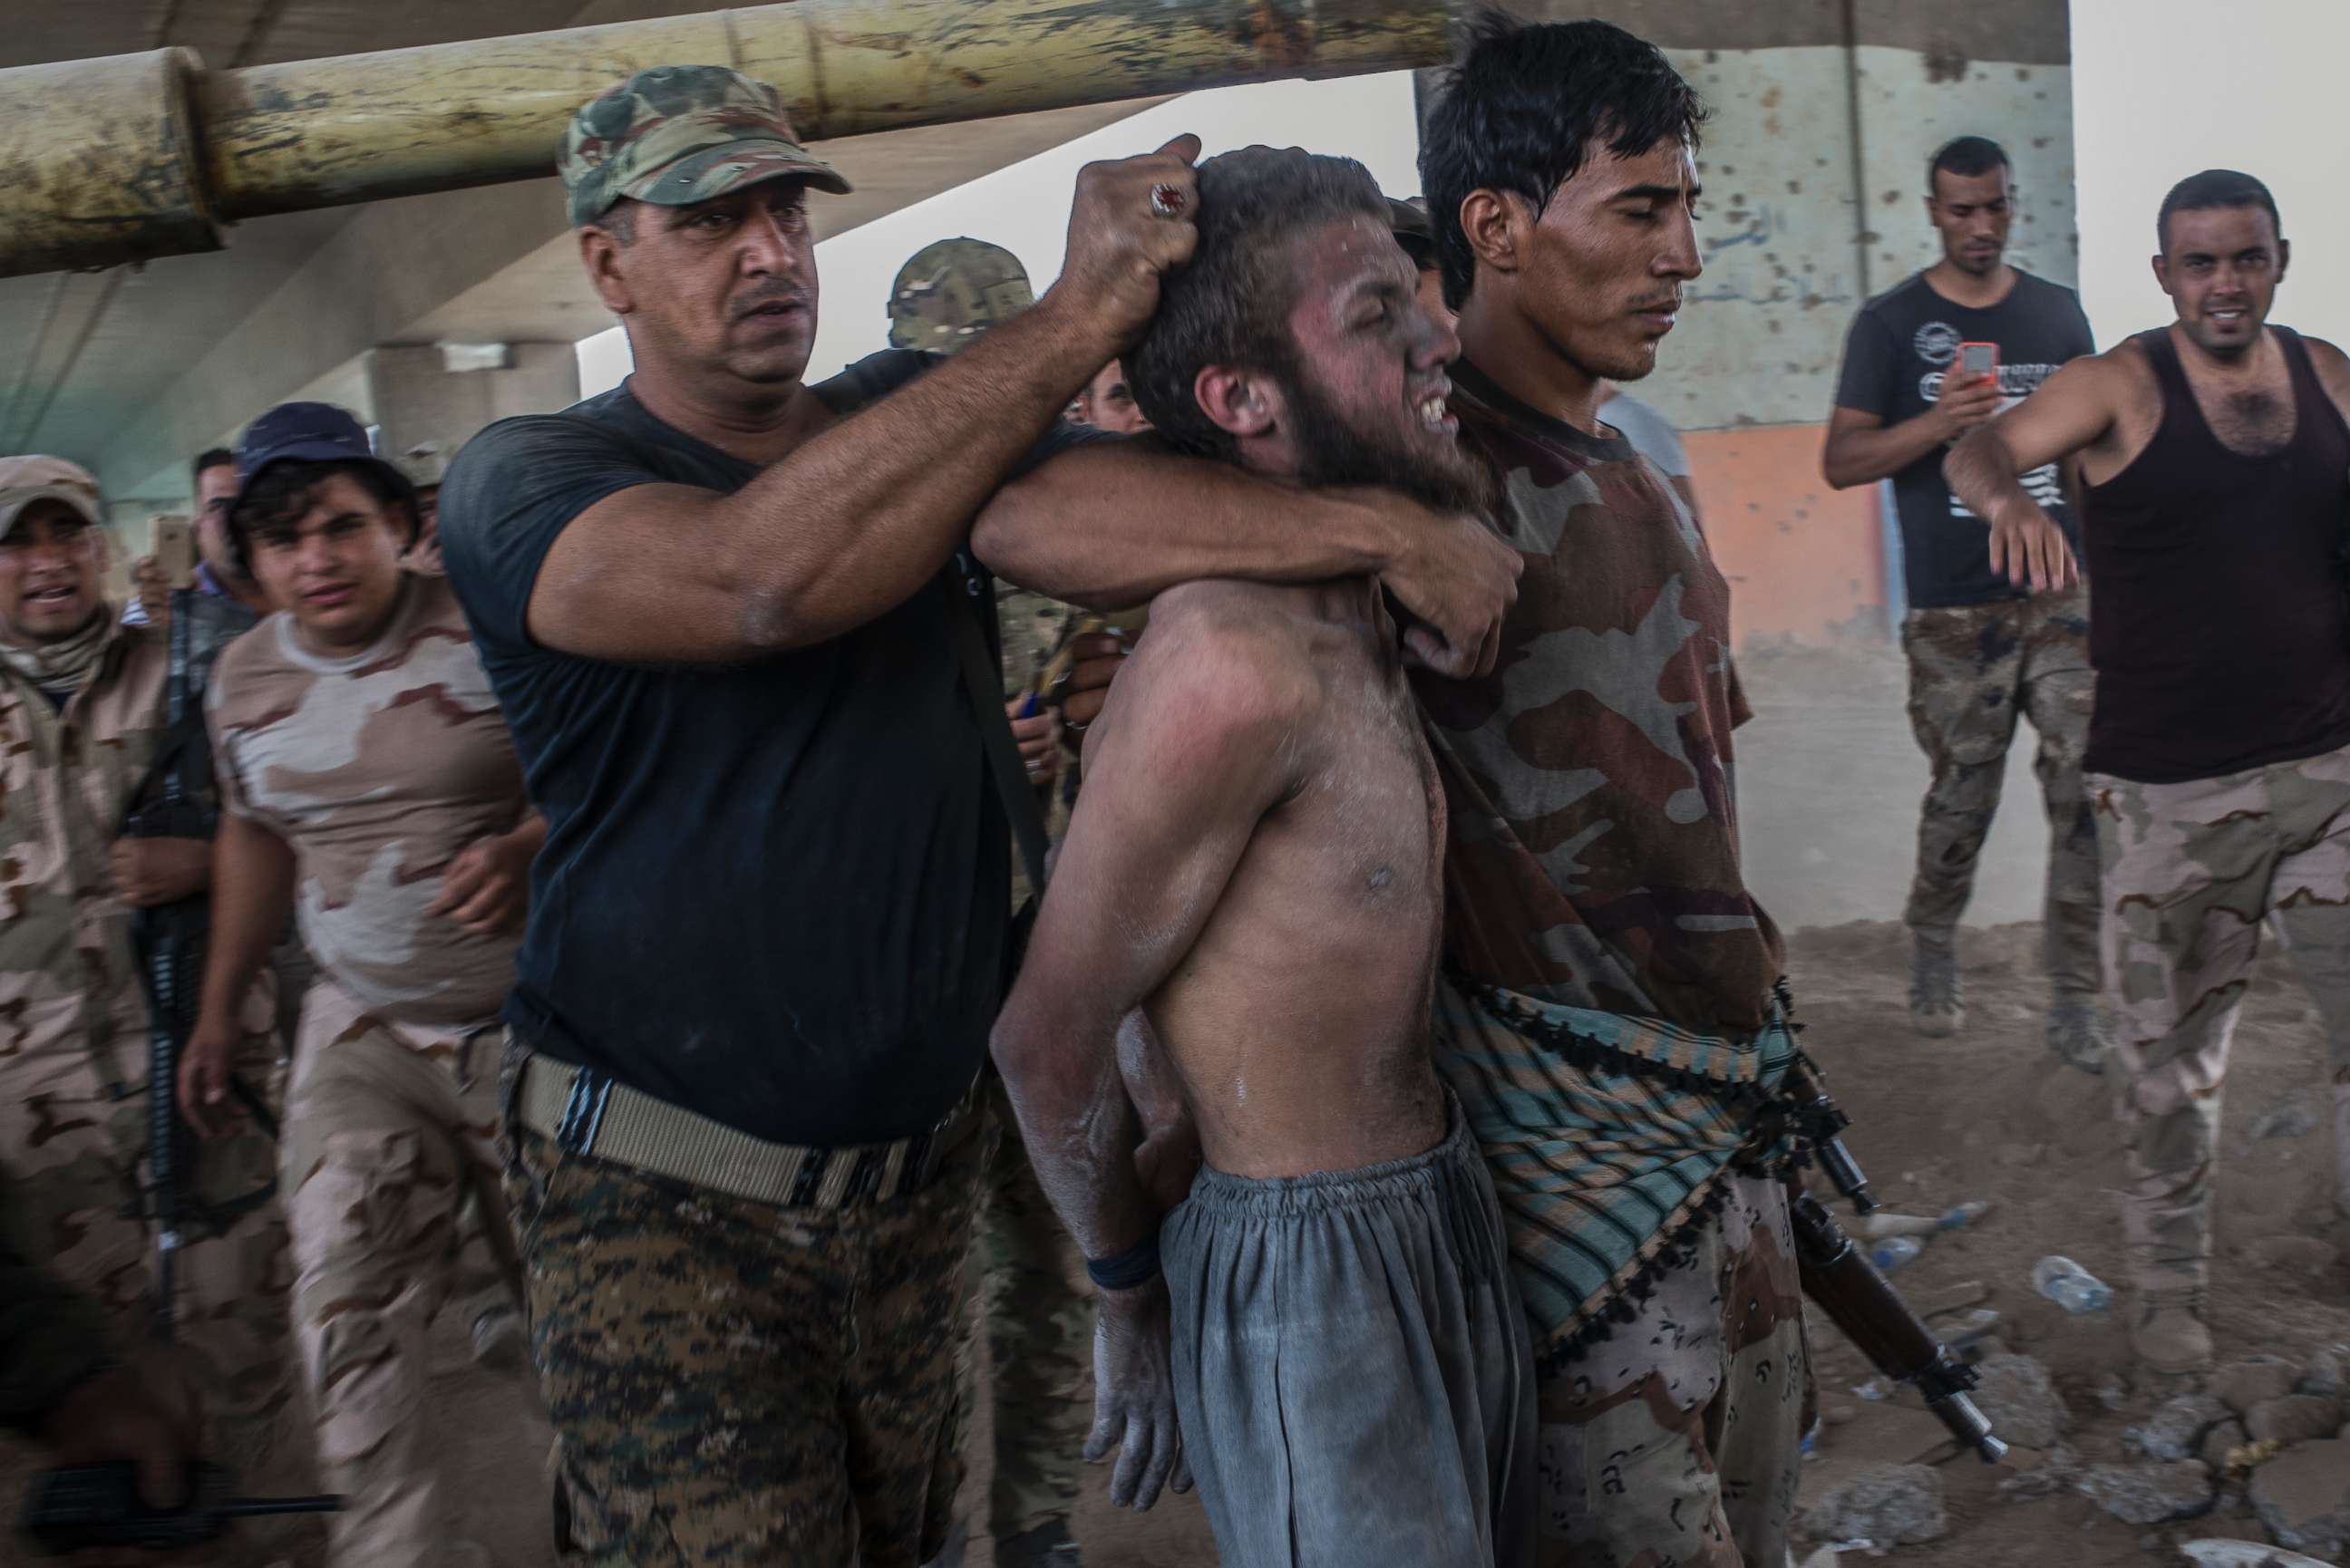 PHOTO: A man suspected of being an Islamic State militant is detained by the Iraqi Army on July 10, 2017 in Mosul, Iraq. Iraqi forces have declared victory but fighting continues as forces face fierce resistance from the desperate remaining IS militants.